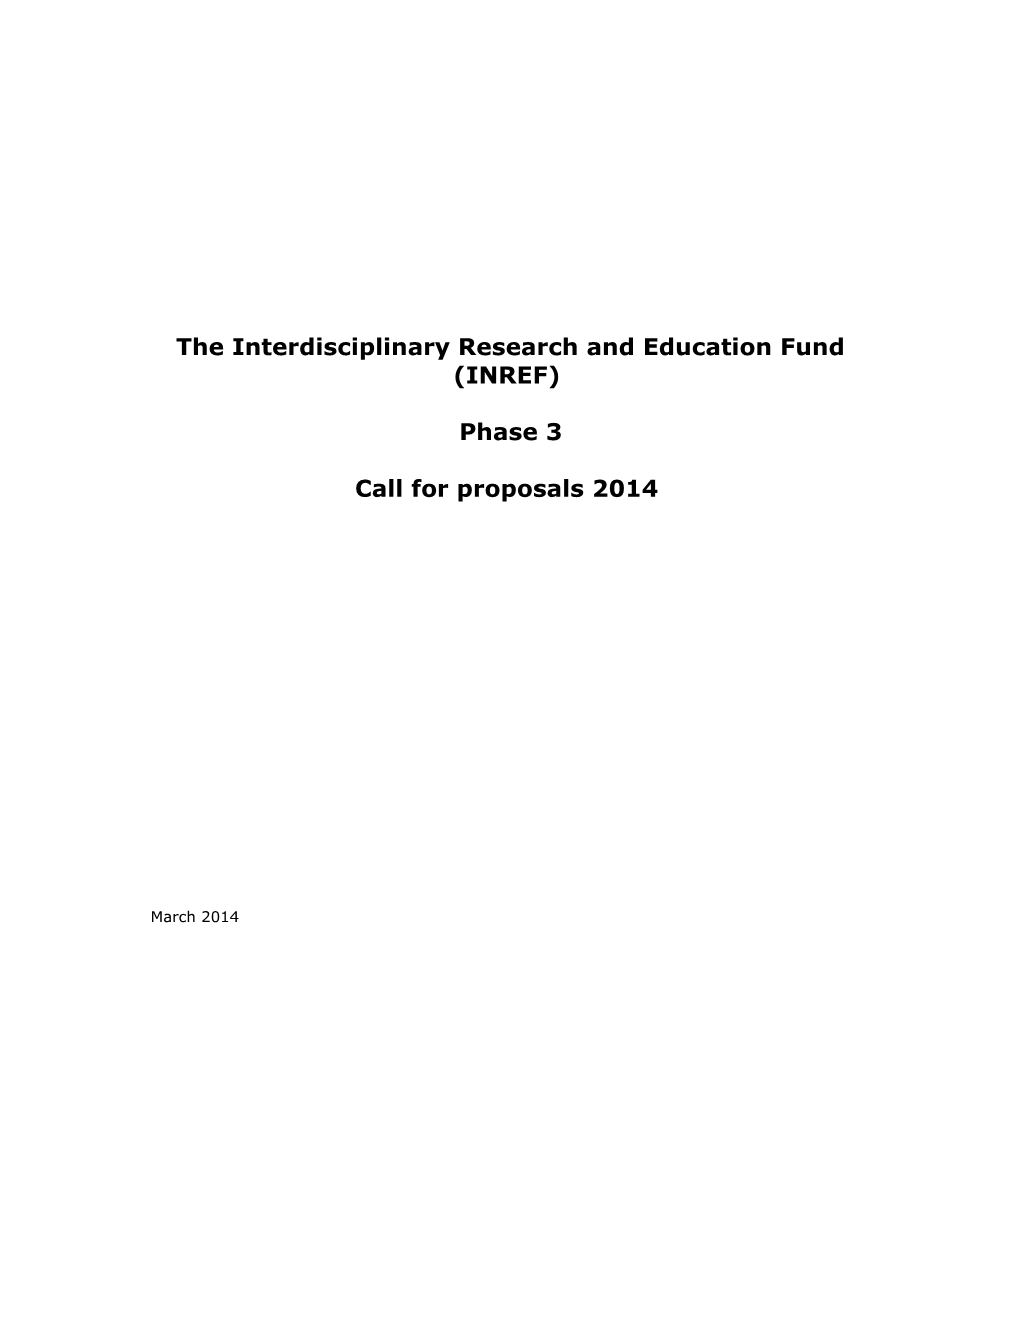 The Interdisciplinary Research and Education Fund (INREF)